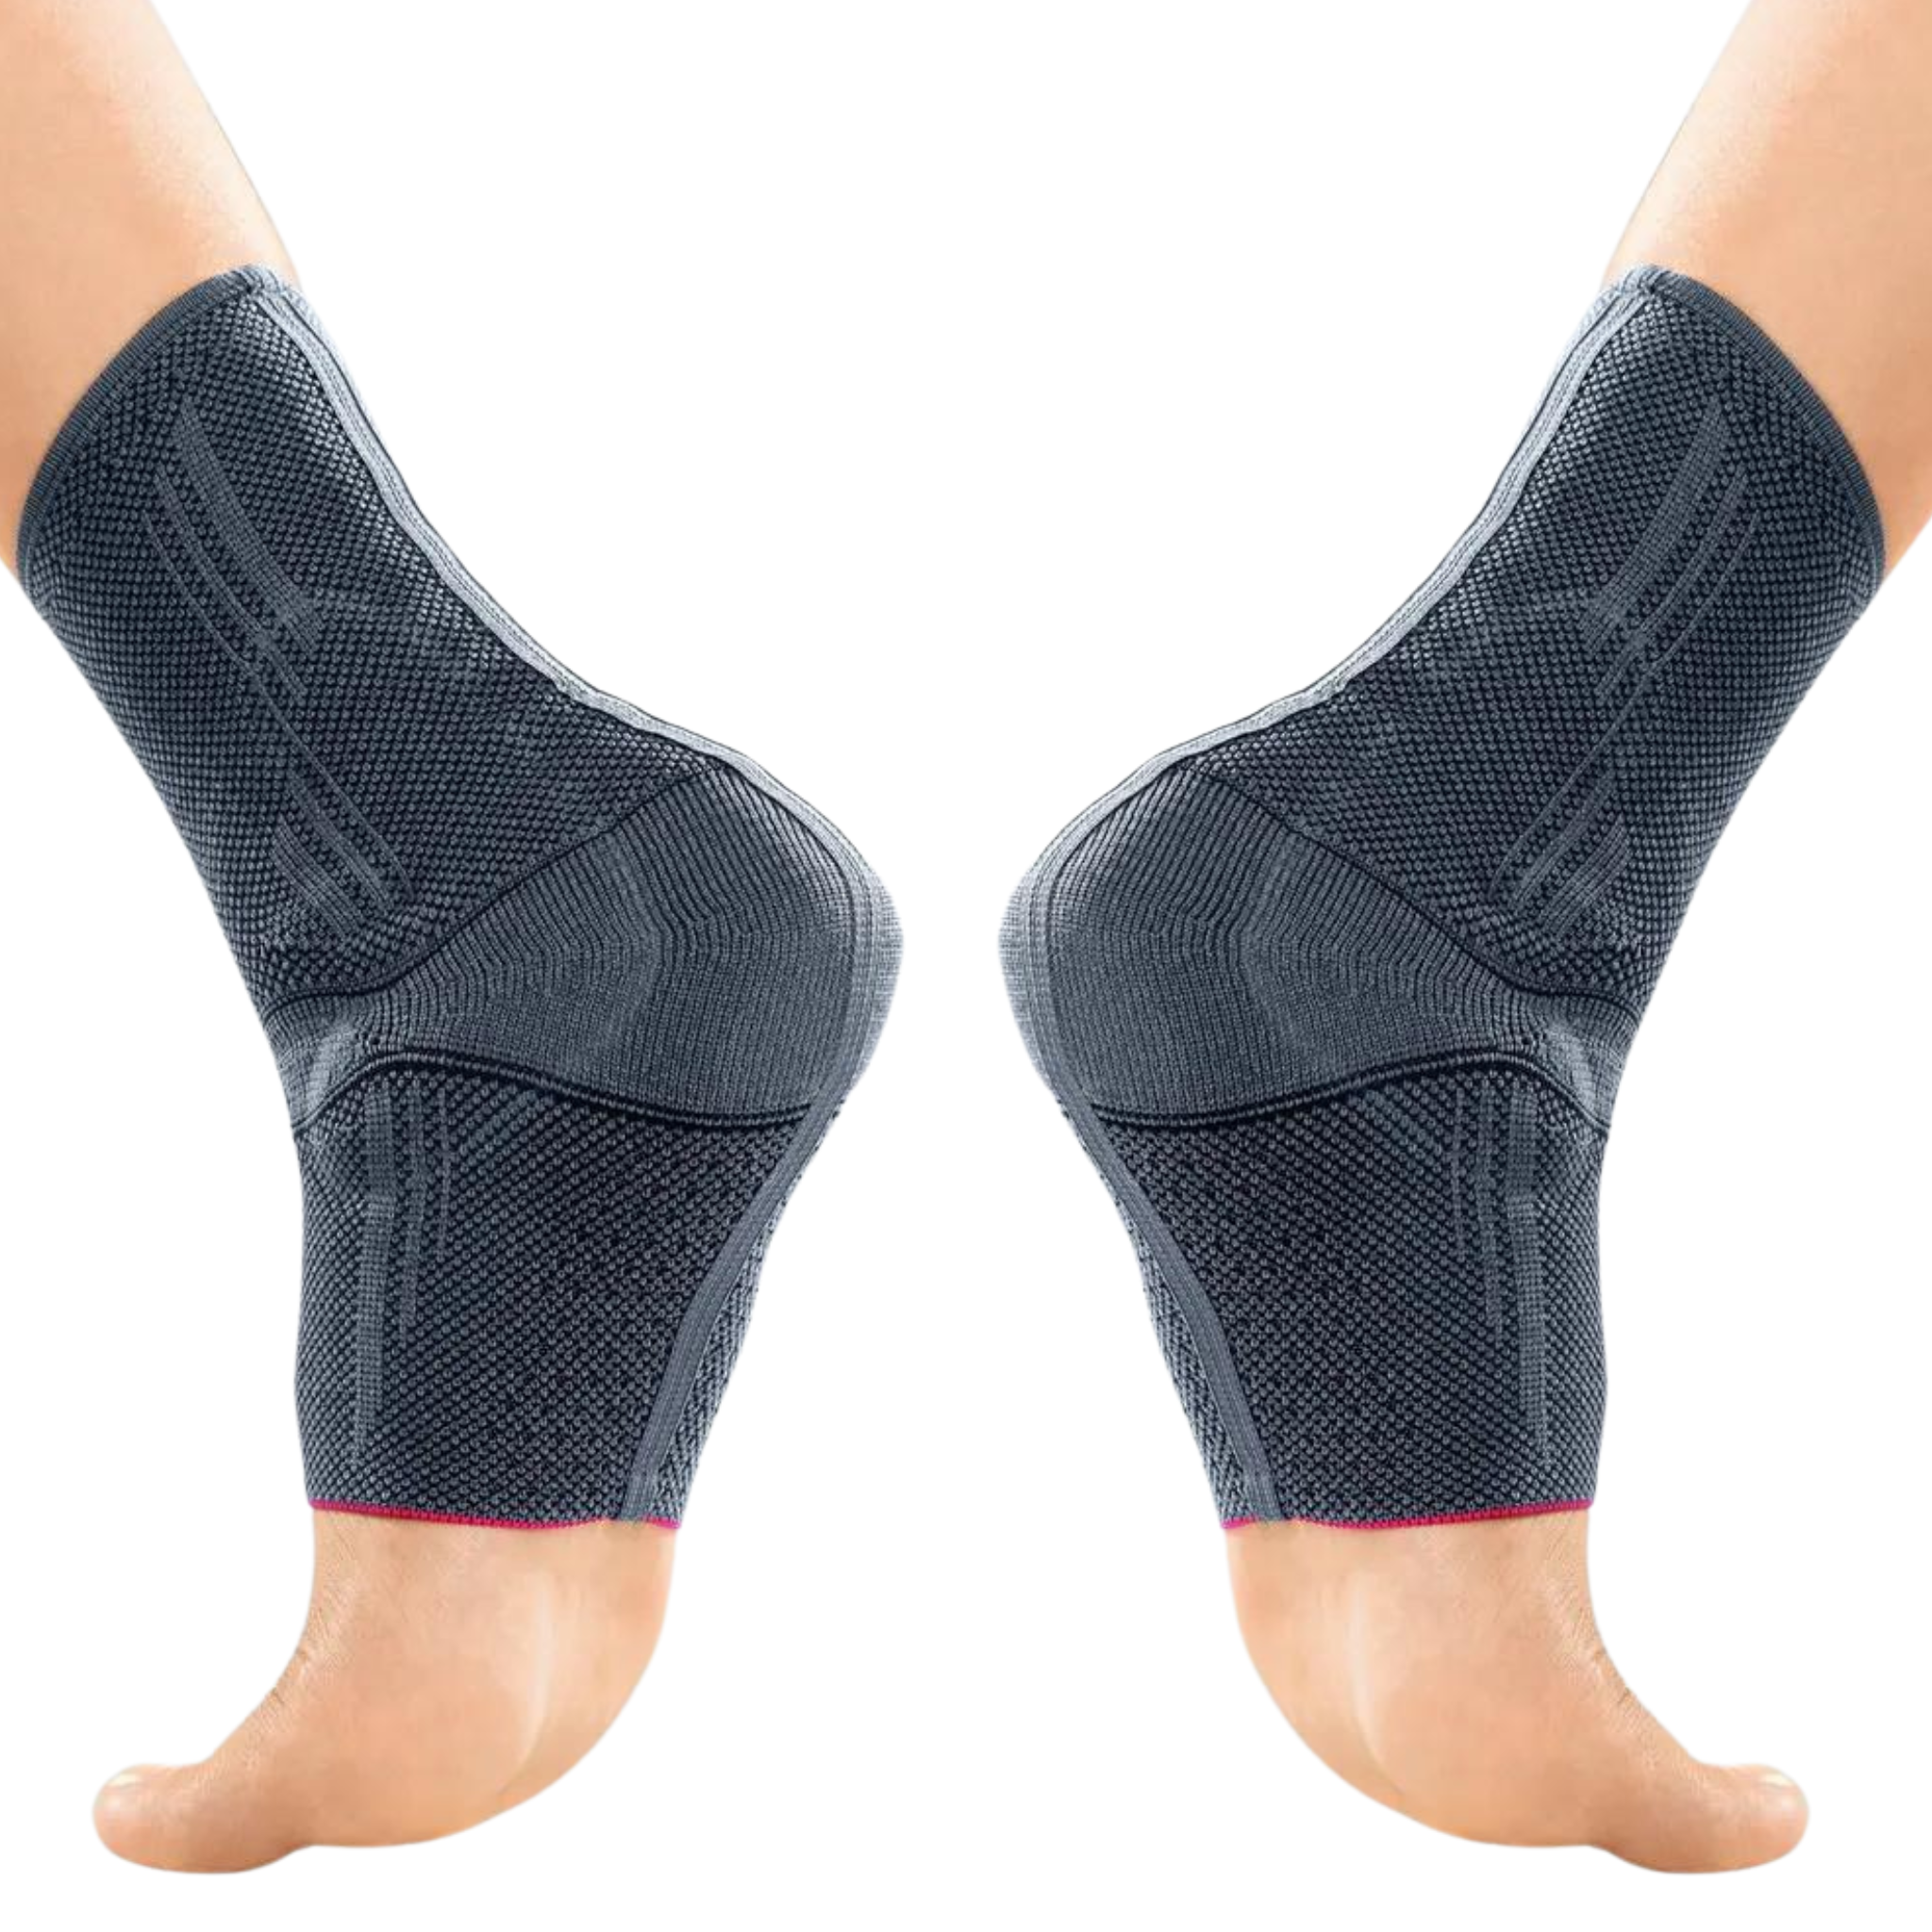 Ankle support | Levamed